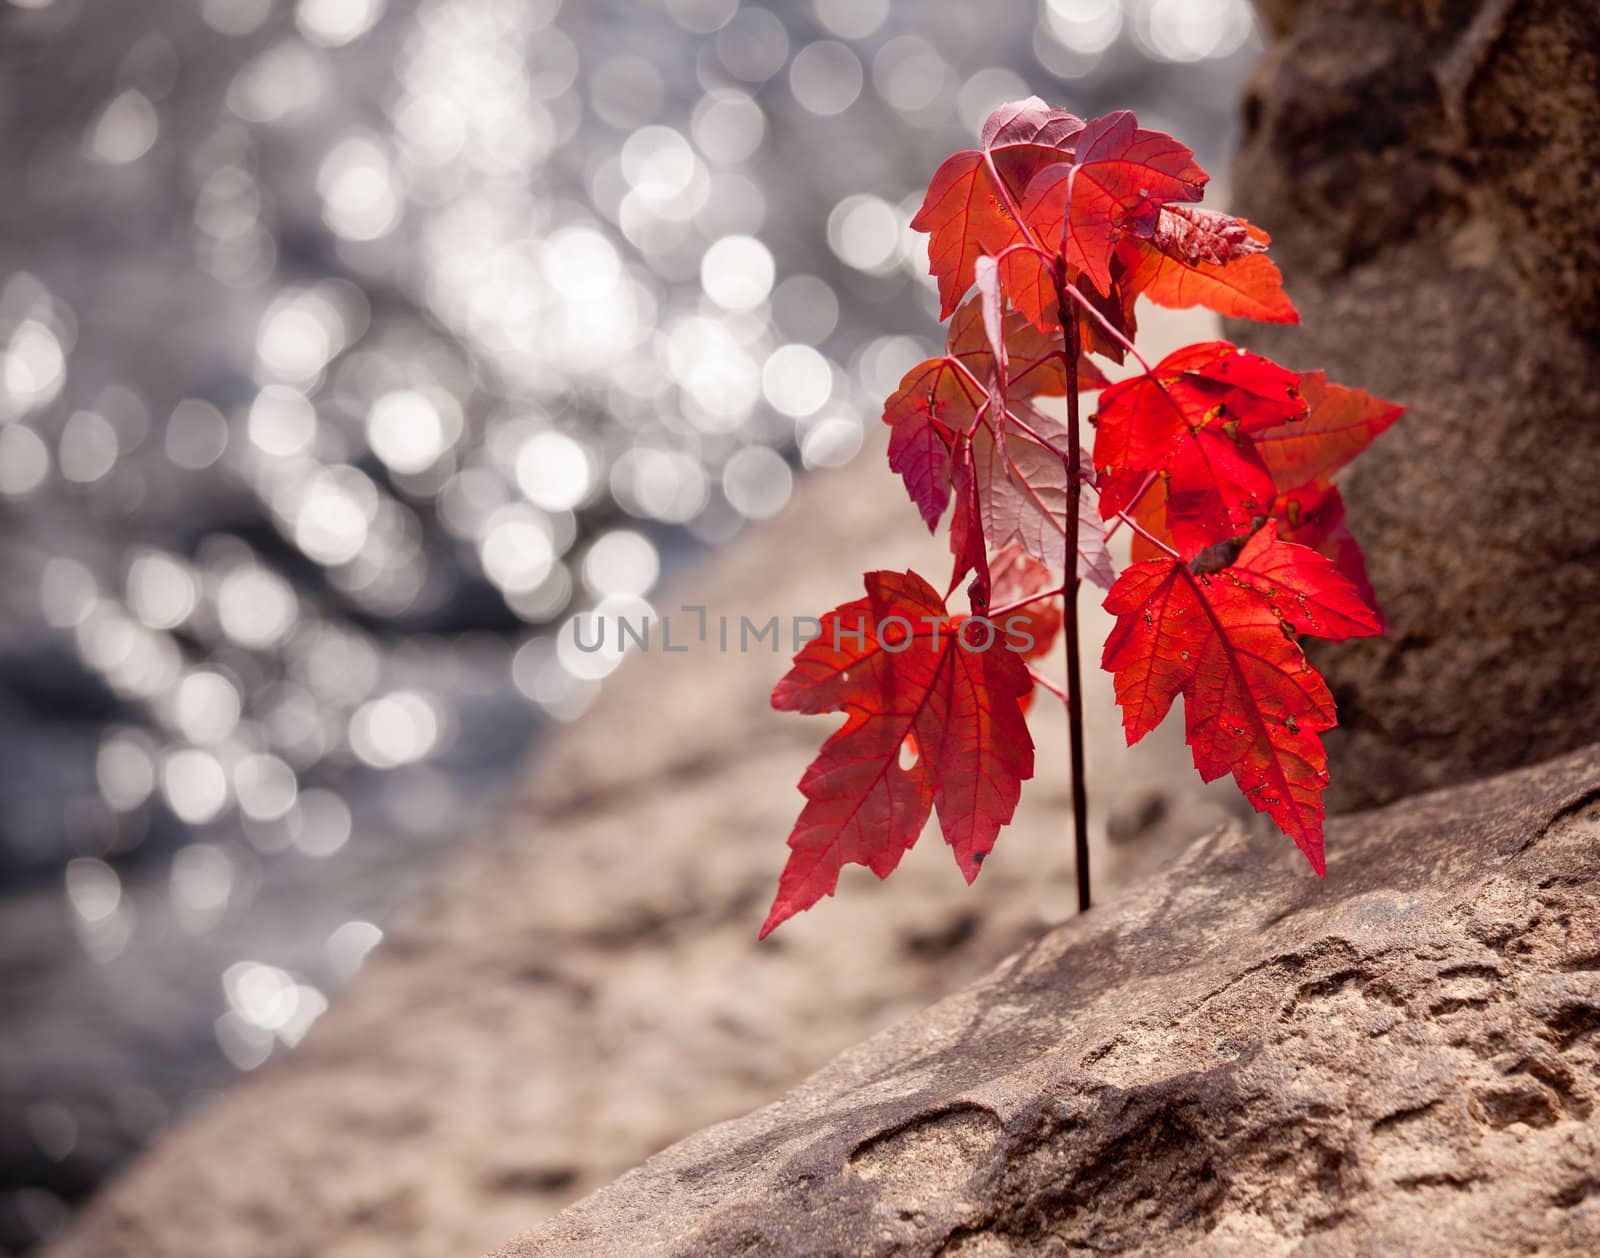 Backlit brilliant red leaves of maple in the fall growing from rock by a sparkling river